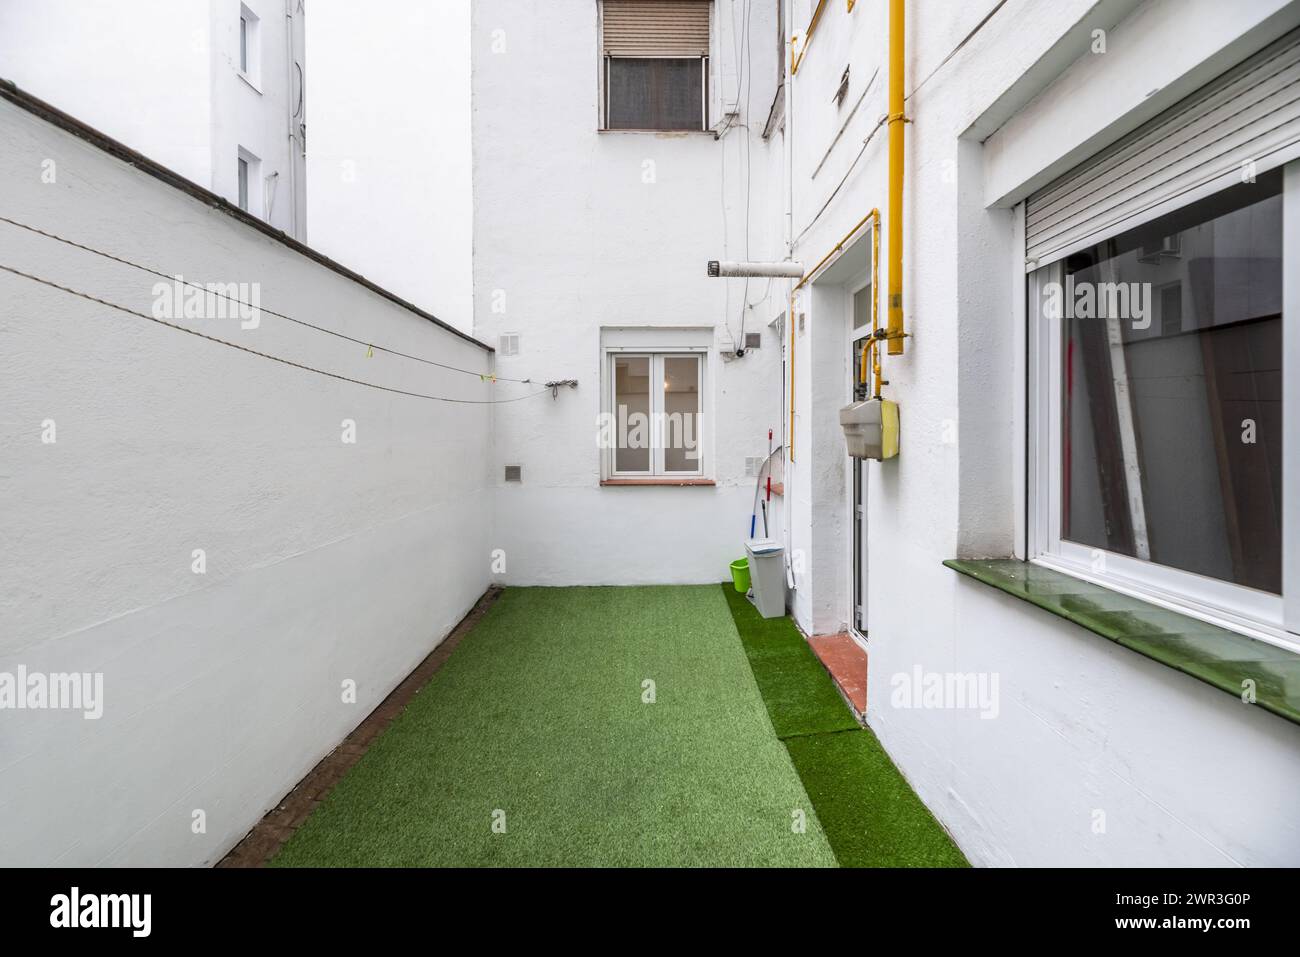 Interior patio of a house with white painted walls, natural gas meter with yellow pipes and artificial grass floors in a ground floor home Stock Photo